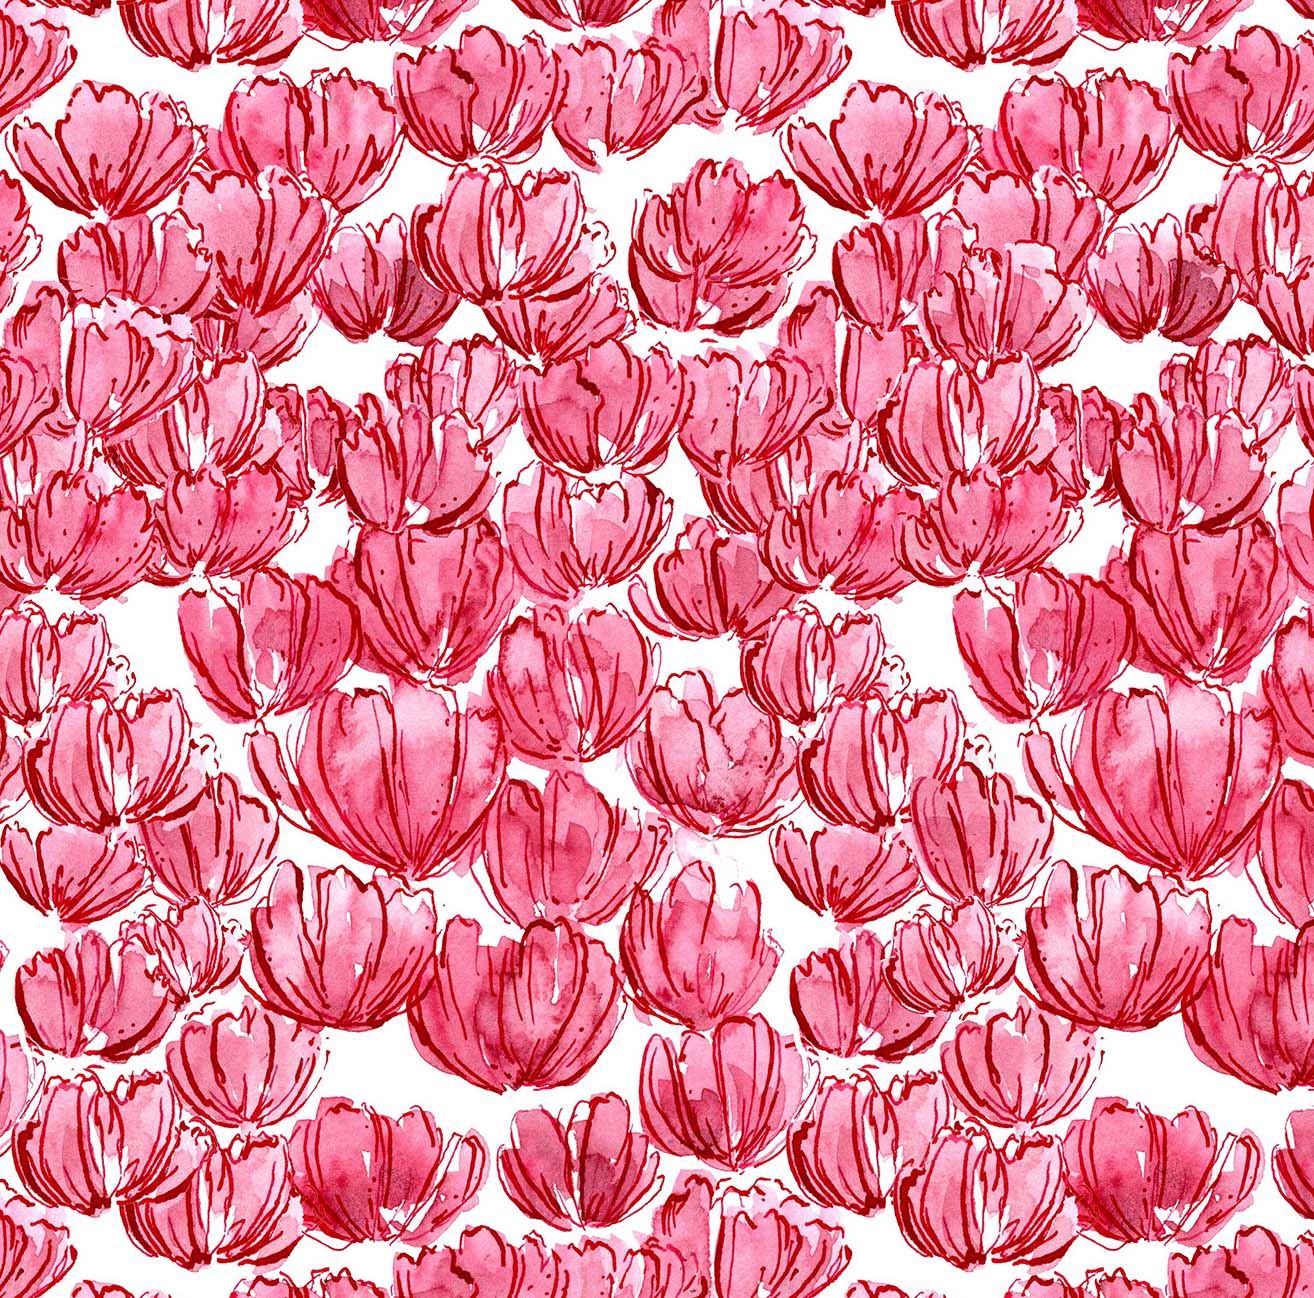 purple tulips full pattern first attempt but not a tile copy.jpg